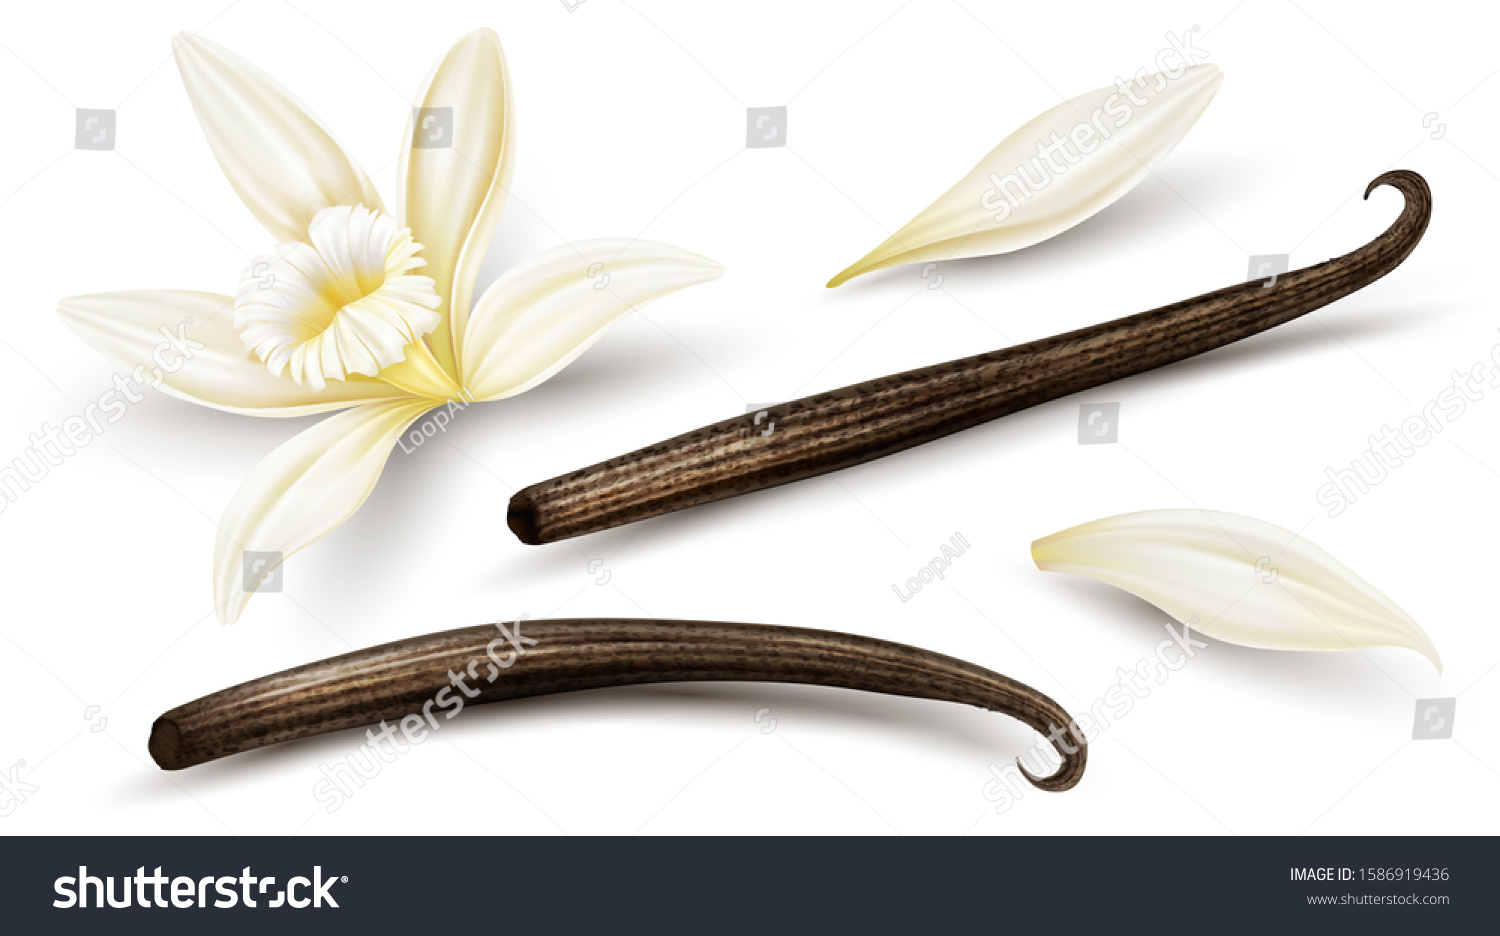 Set of Vanilla flower with dried vanilla sticks and petals. Realistic food cooking condiment. Aromatic seasoning ingredient for cookery and sweet baking, Isolated white. Vector illustration. #1586919436